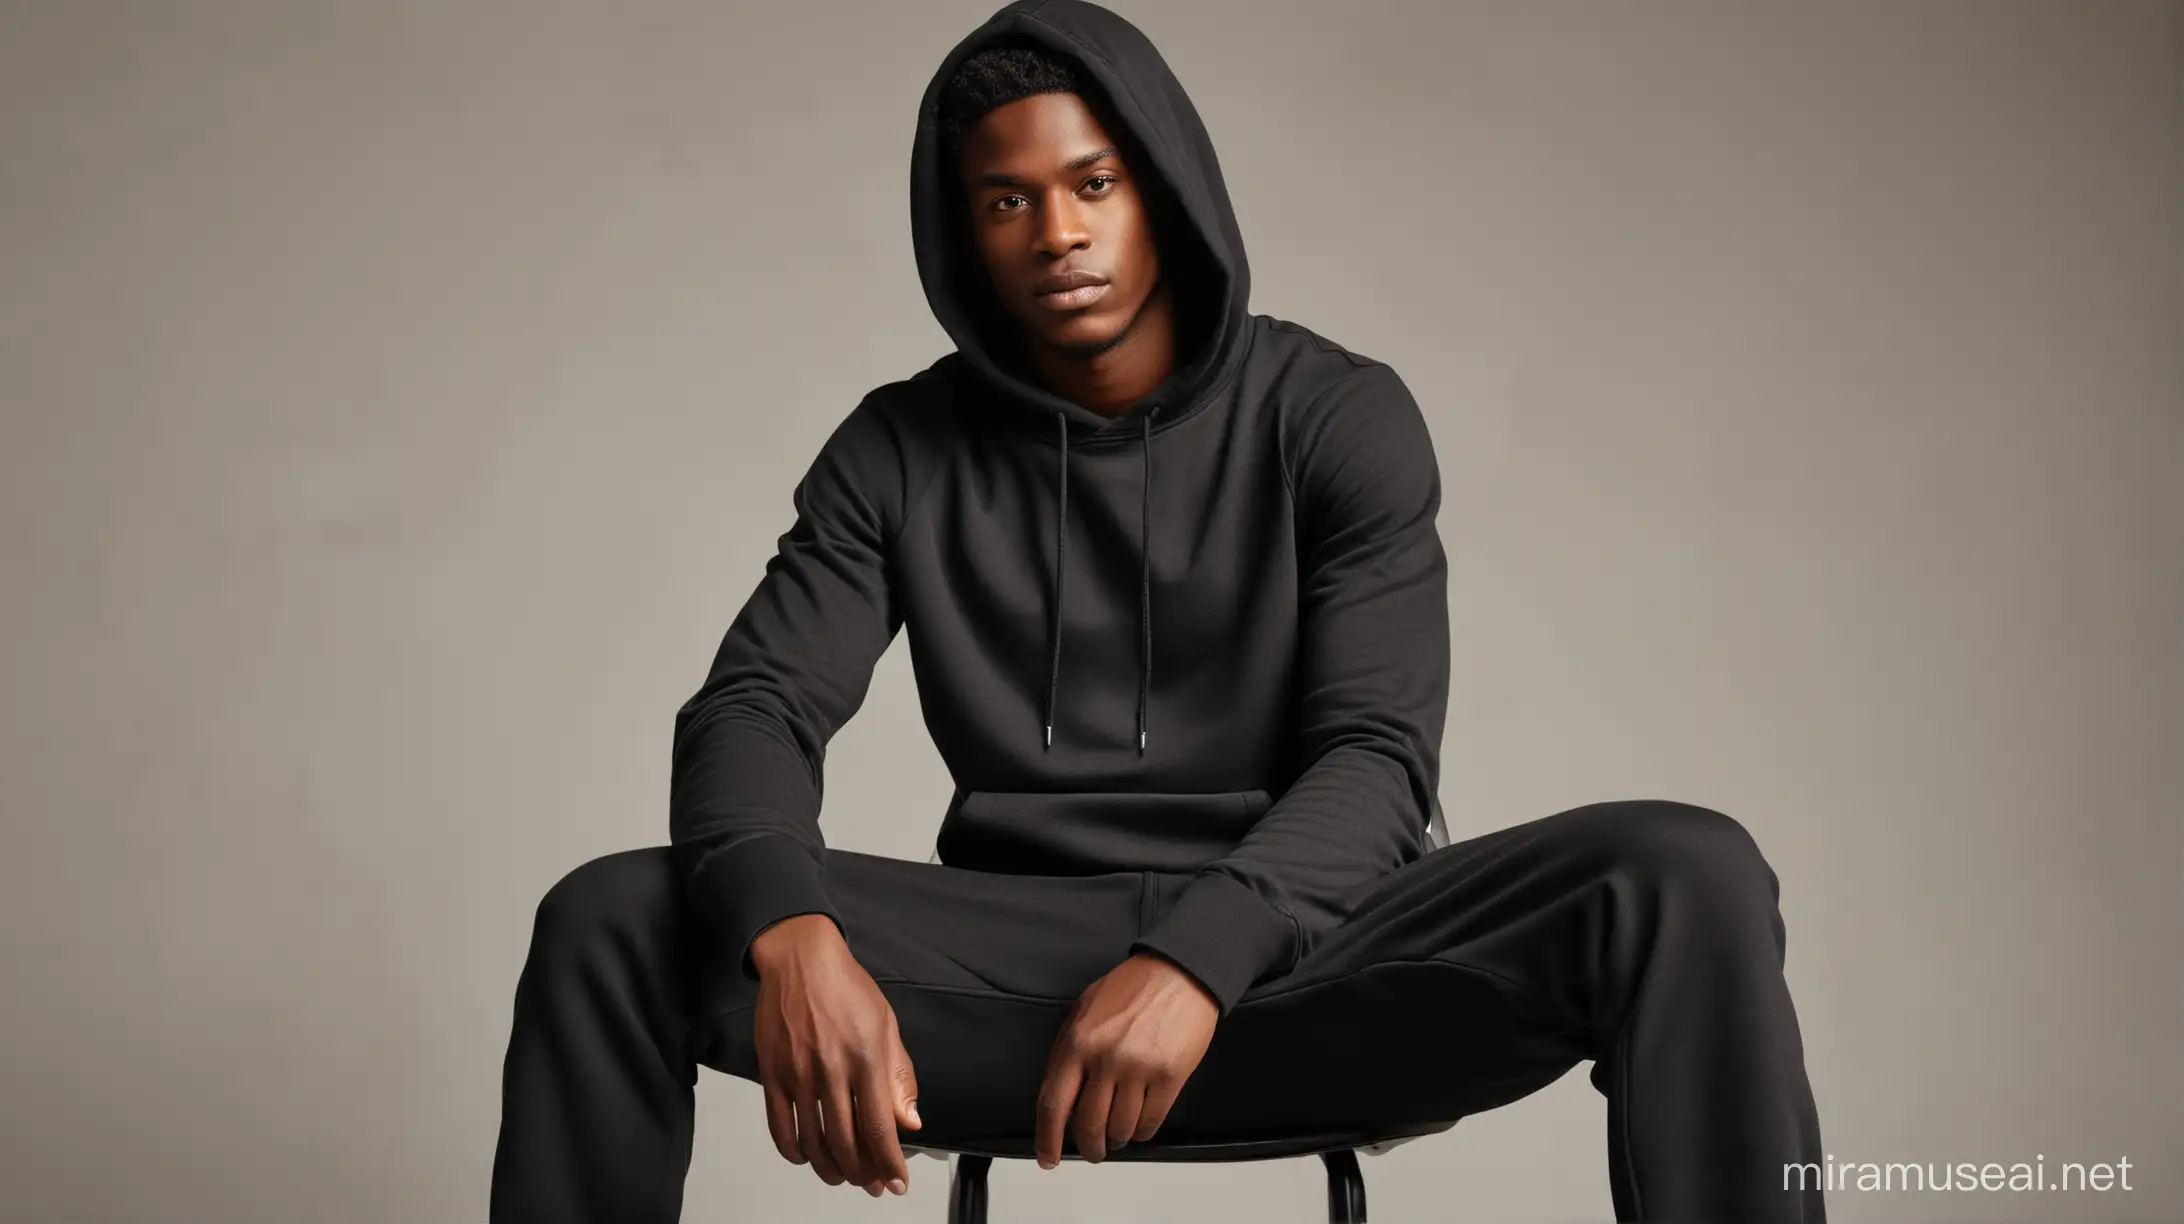 Fashionable Black Man Model in Casual Attire Sitting on Chair